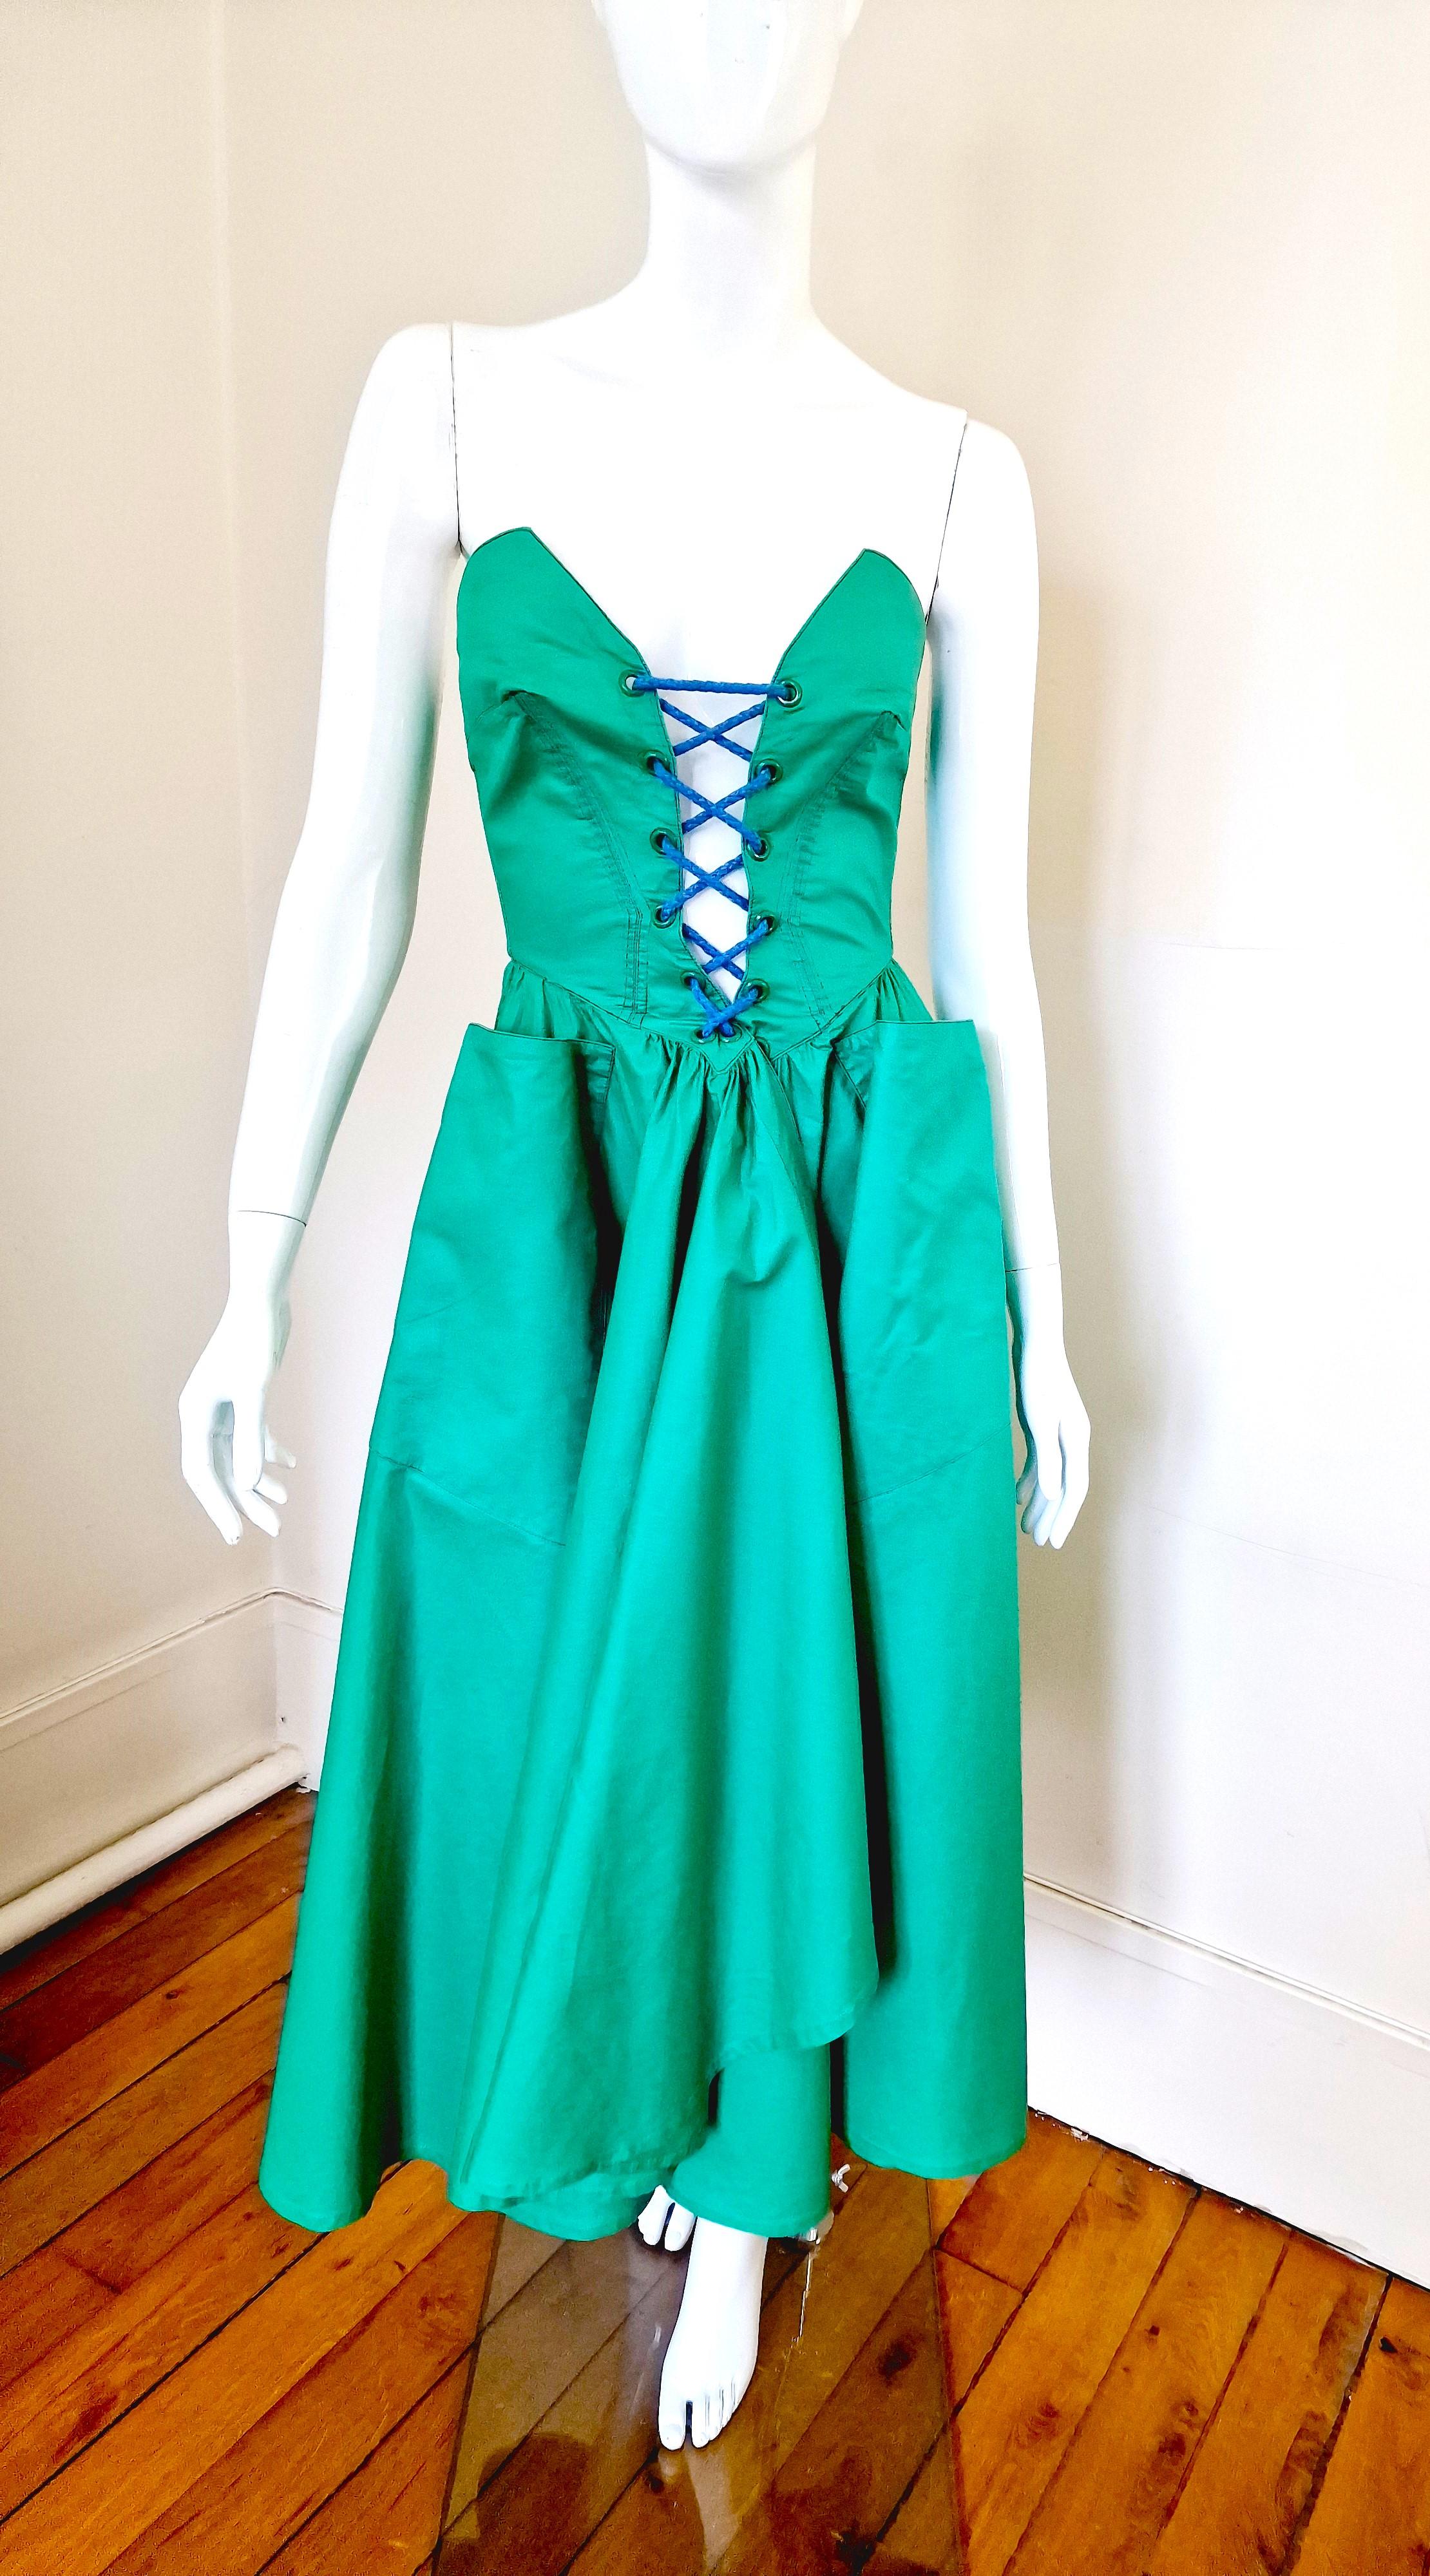 Thierry Mugler Corset Lace Up Green Vintage Couture Gown Prom Bustier Dress en vente 9